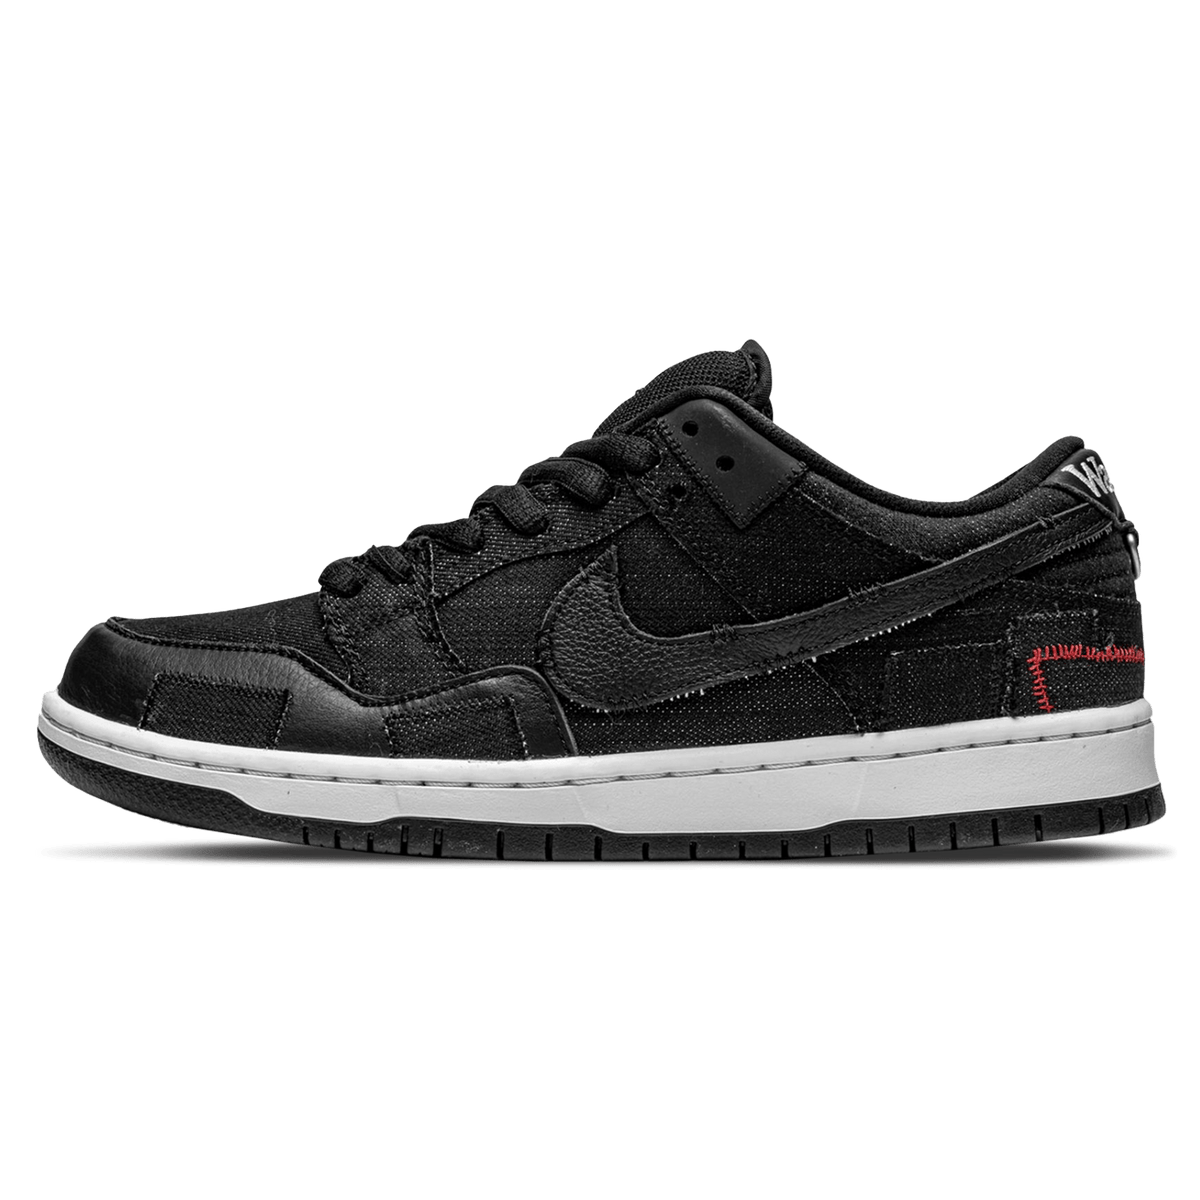 nike sb dunk low wasted youth DD8386 001 1